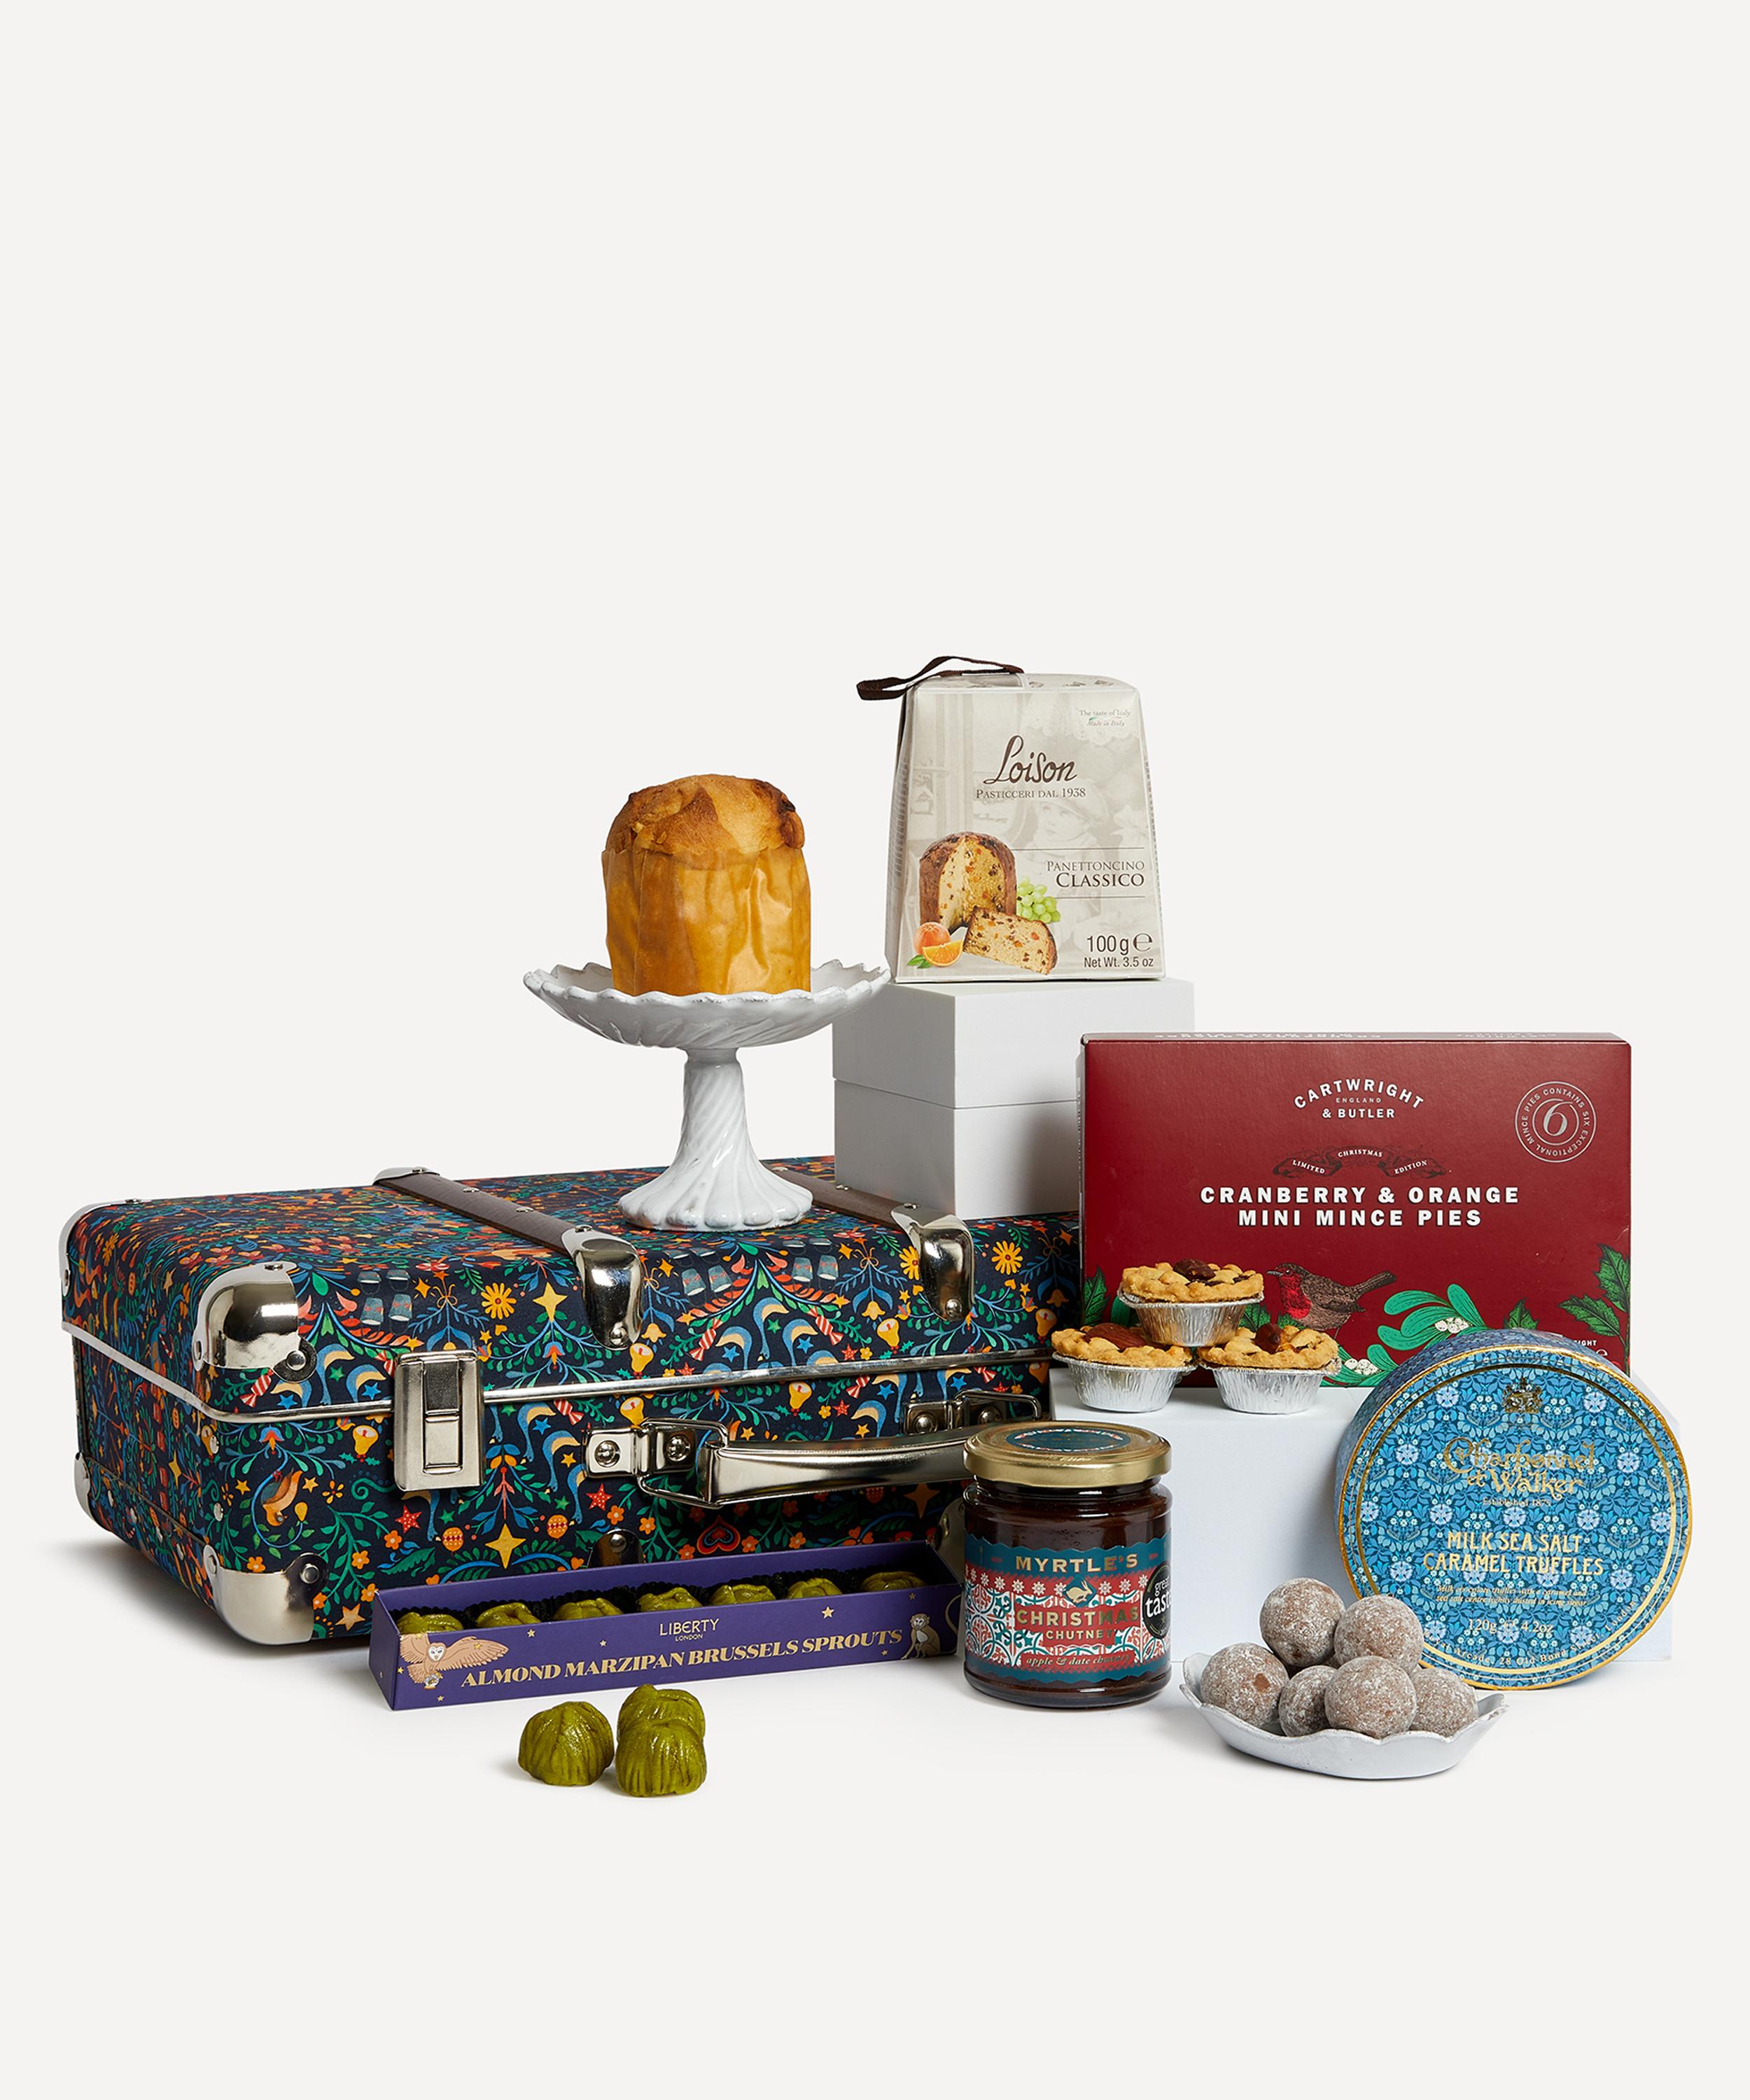 Liberty 12 Days Of Christmas Suitcase Hamper